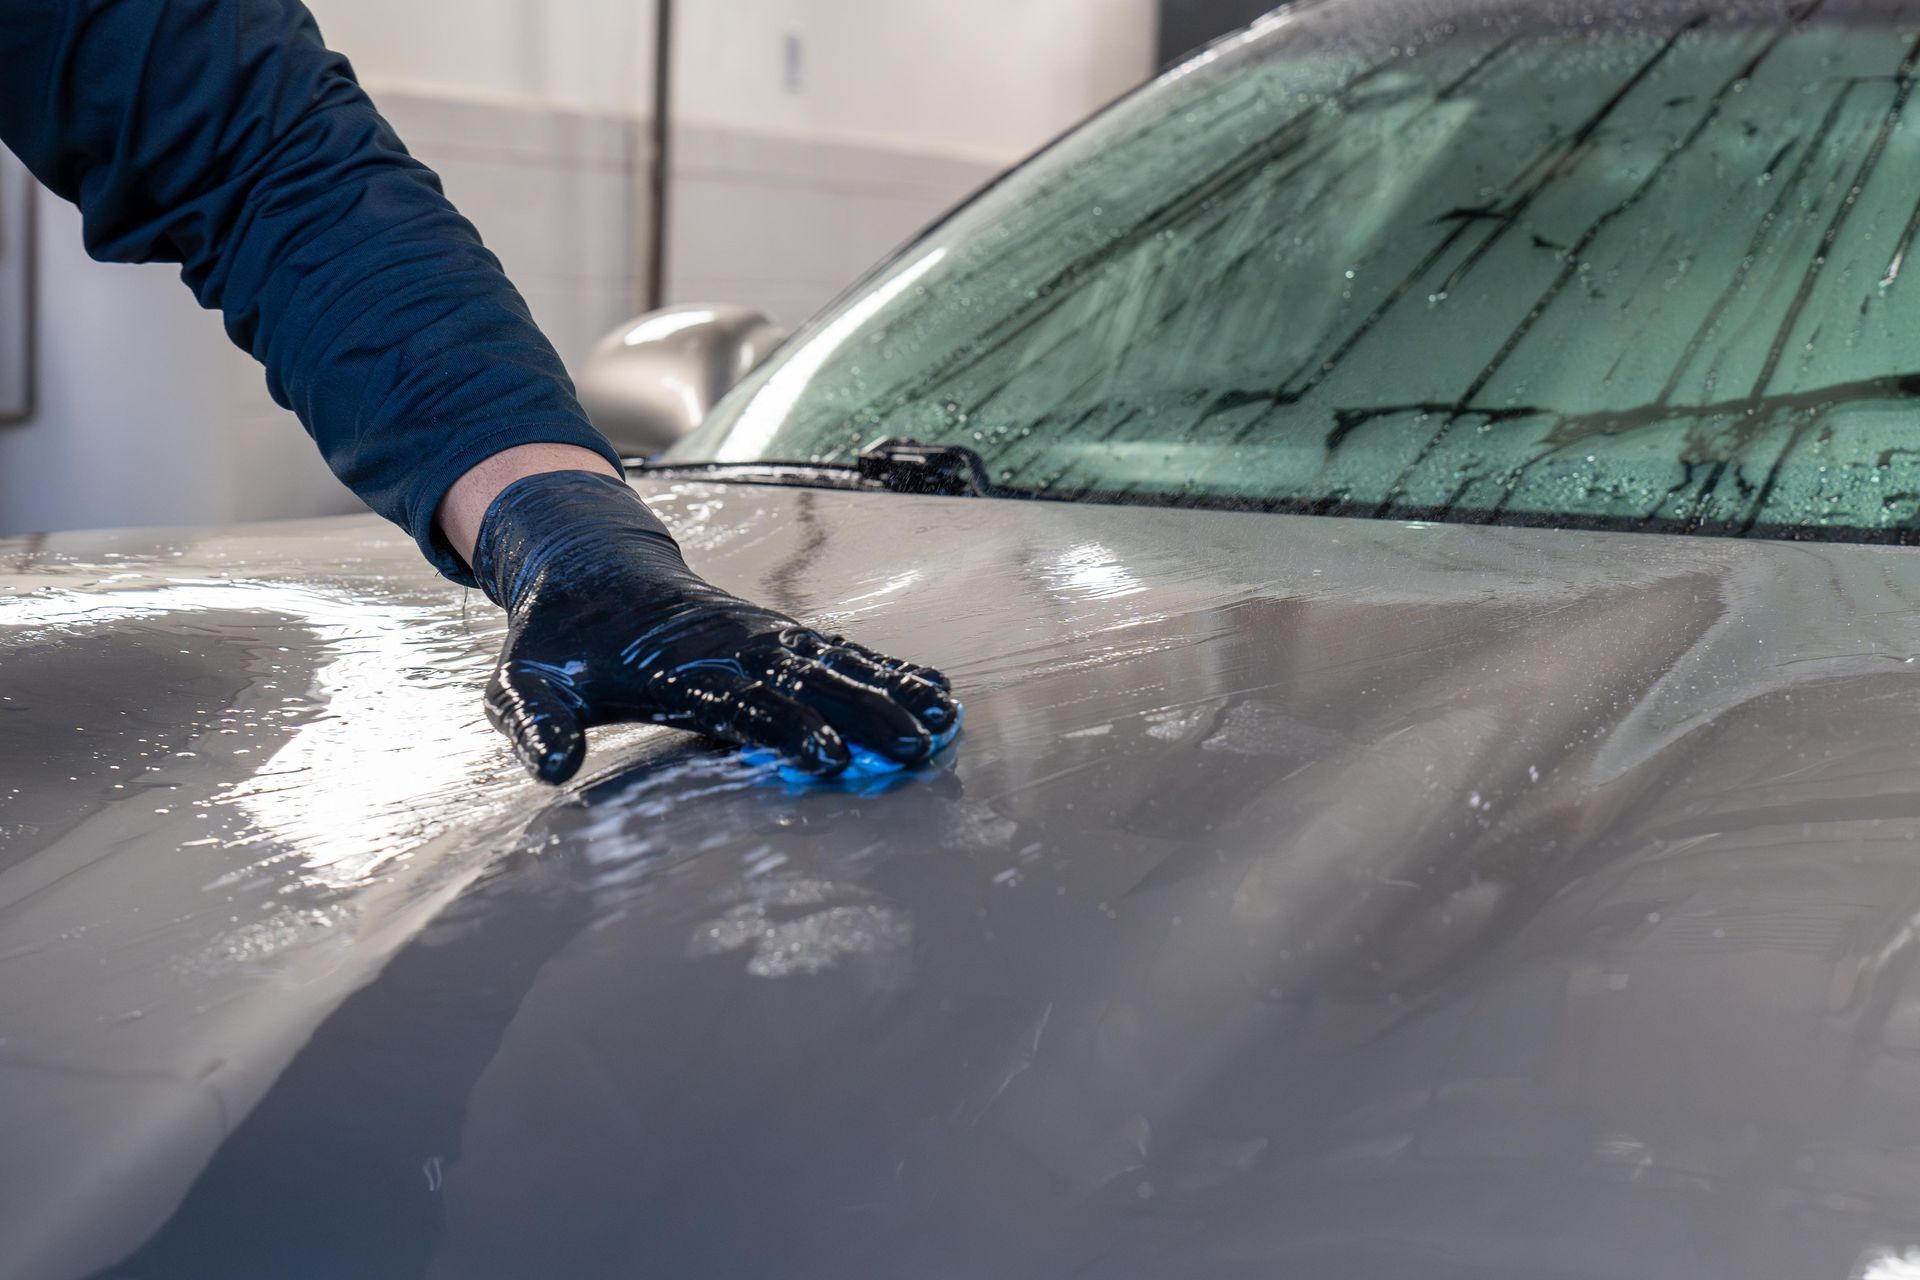 A person is cleaning the hood of a car with a sponge.